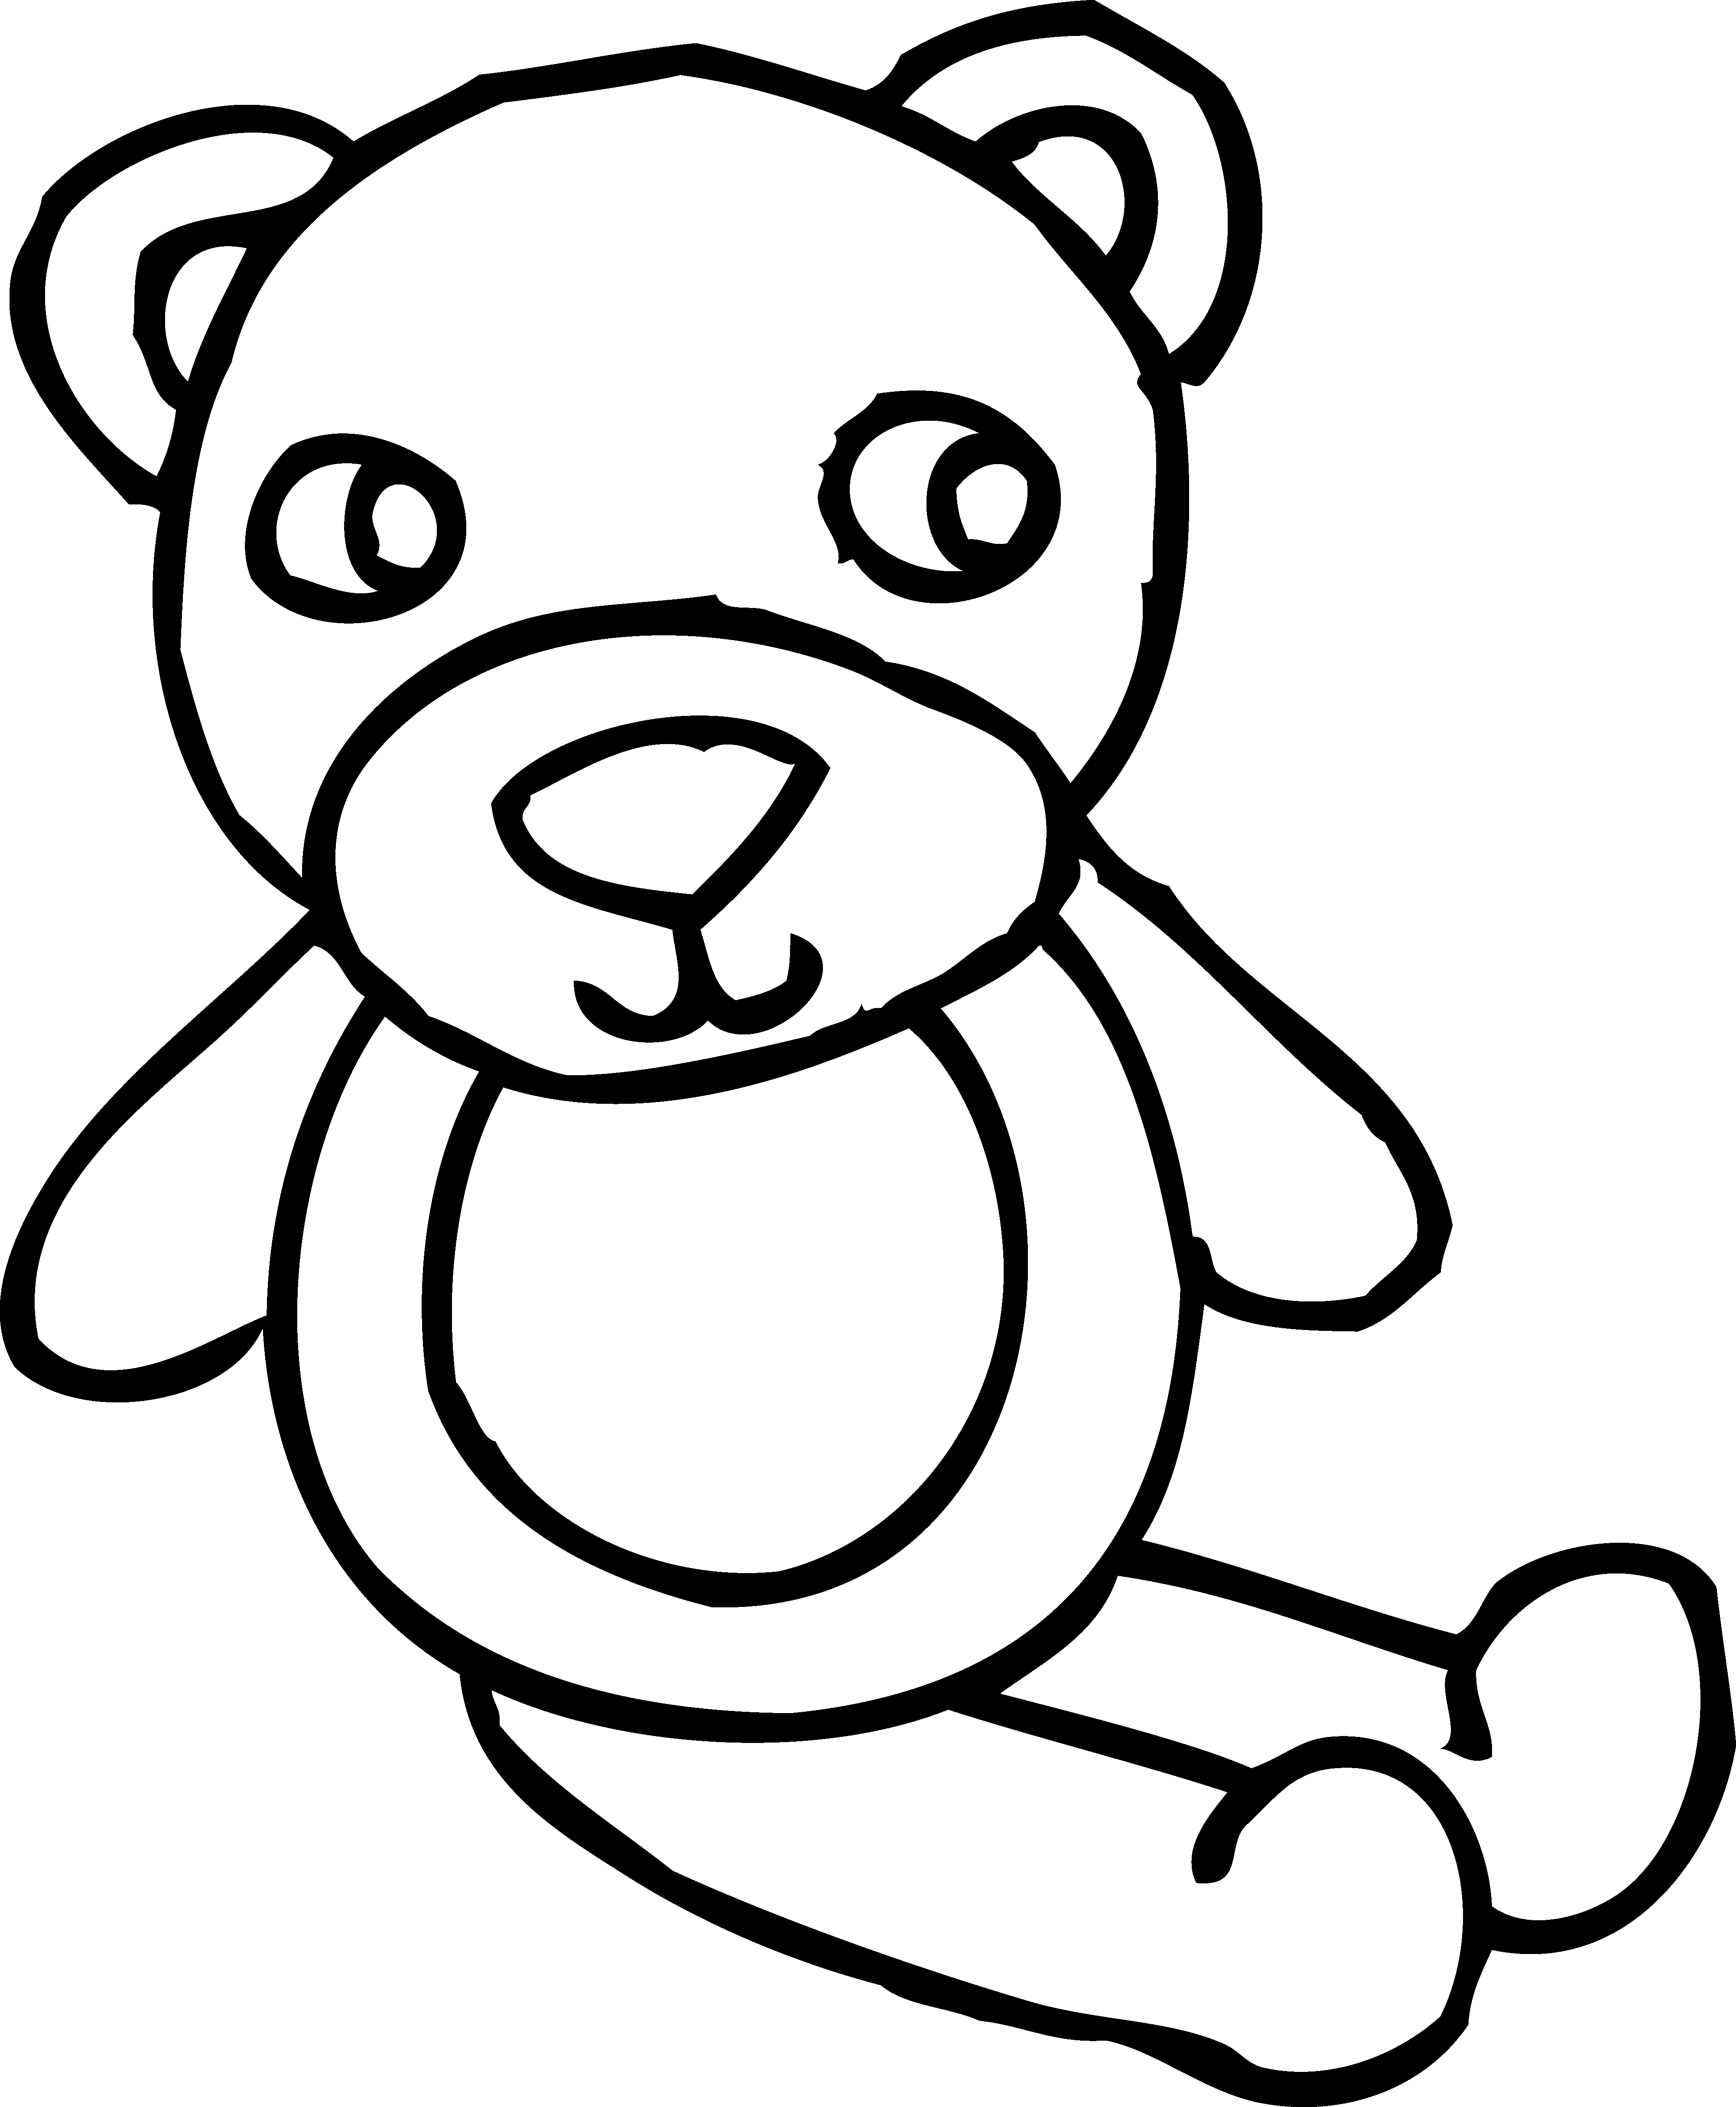 Outline Of A Bear Ocoloringpages Png Image Clipart